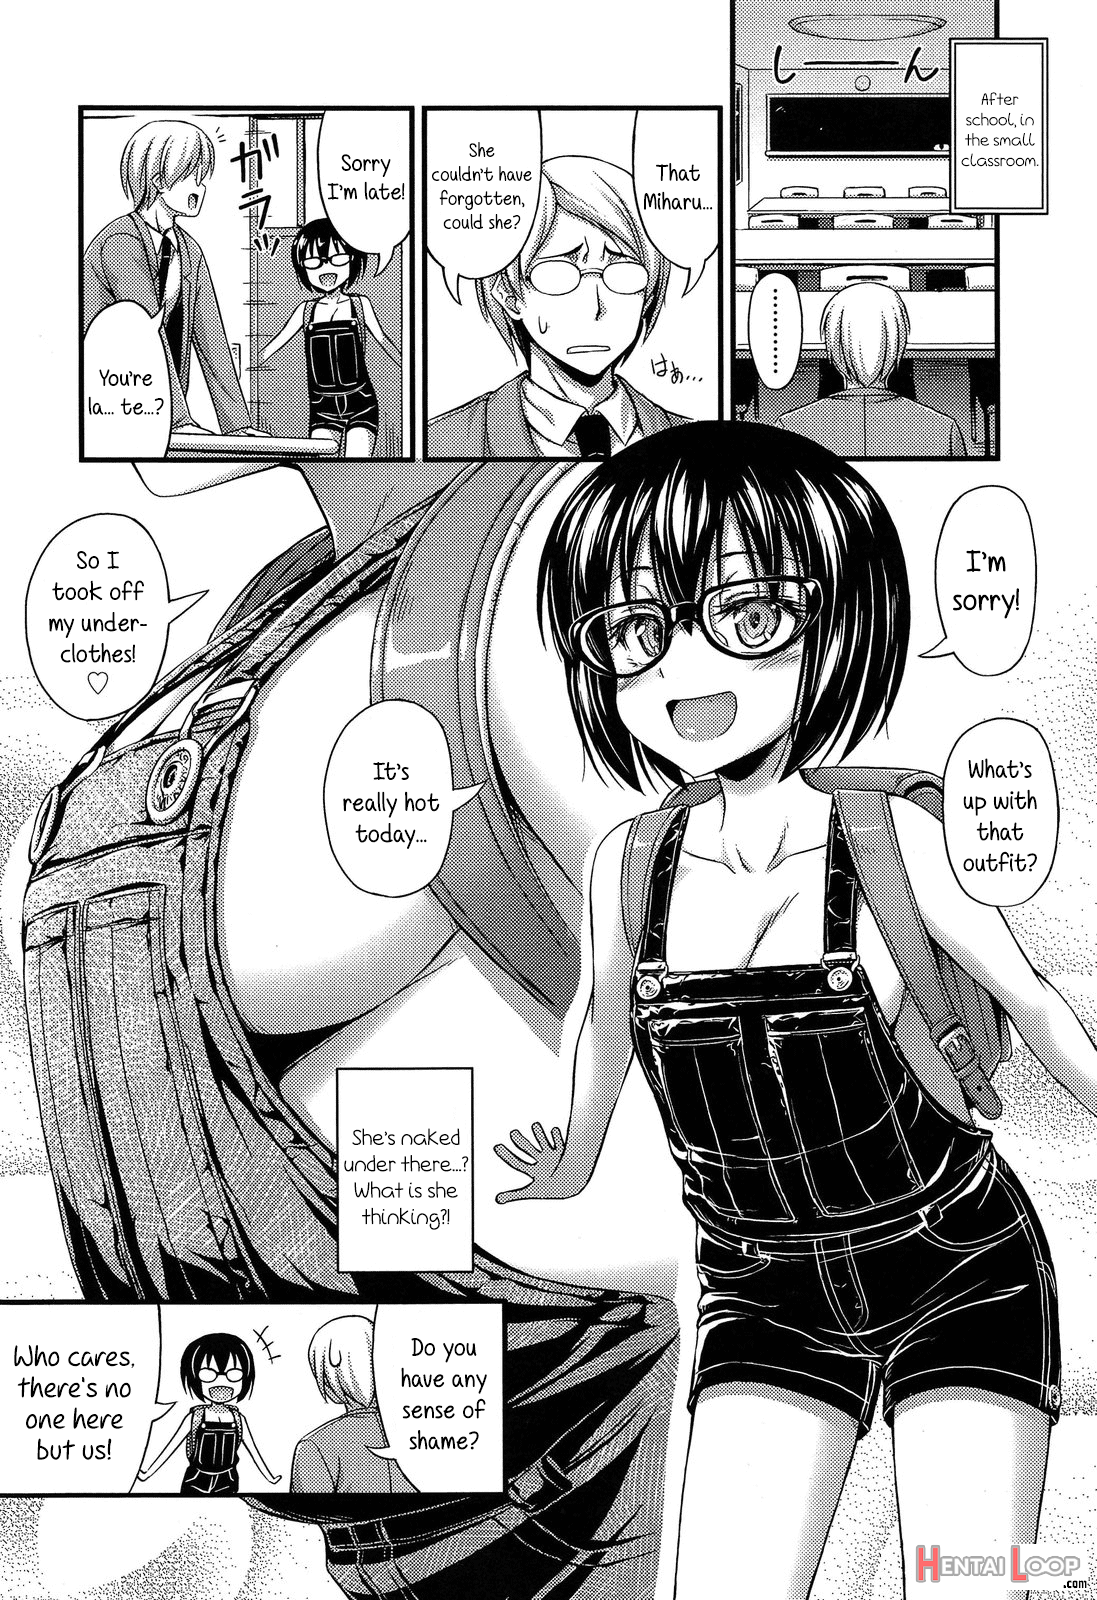 Overalls page 4